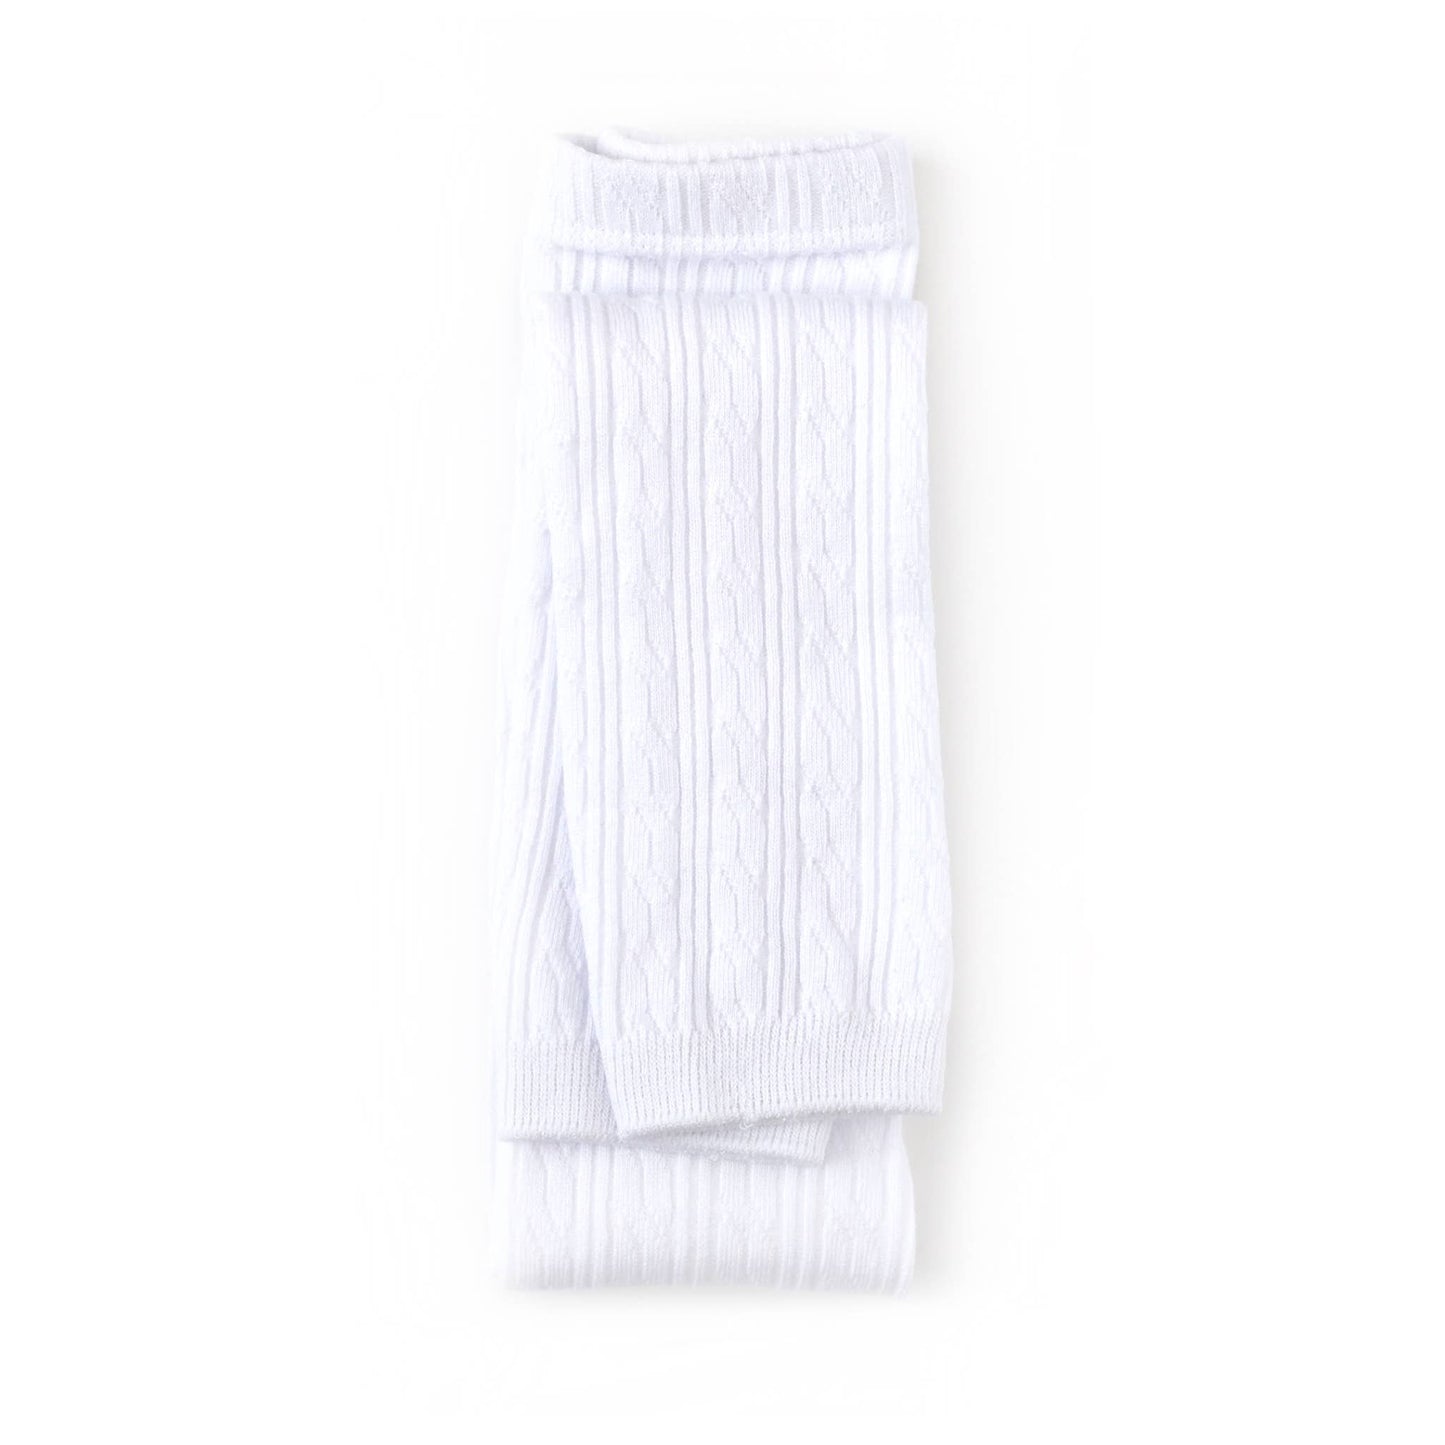 Little Stocking Co. - White Cable Knit Footless Tights: 6 - 12 Months